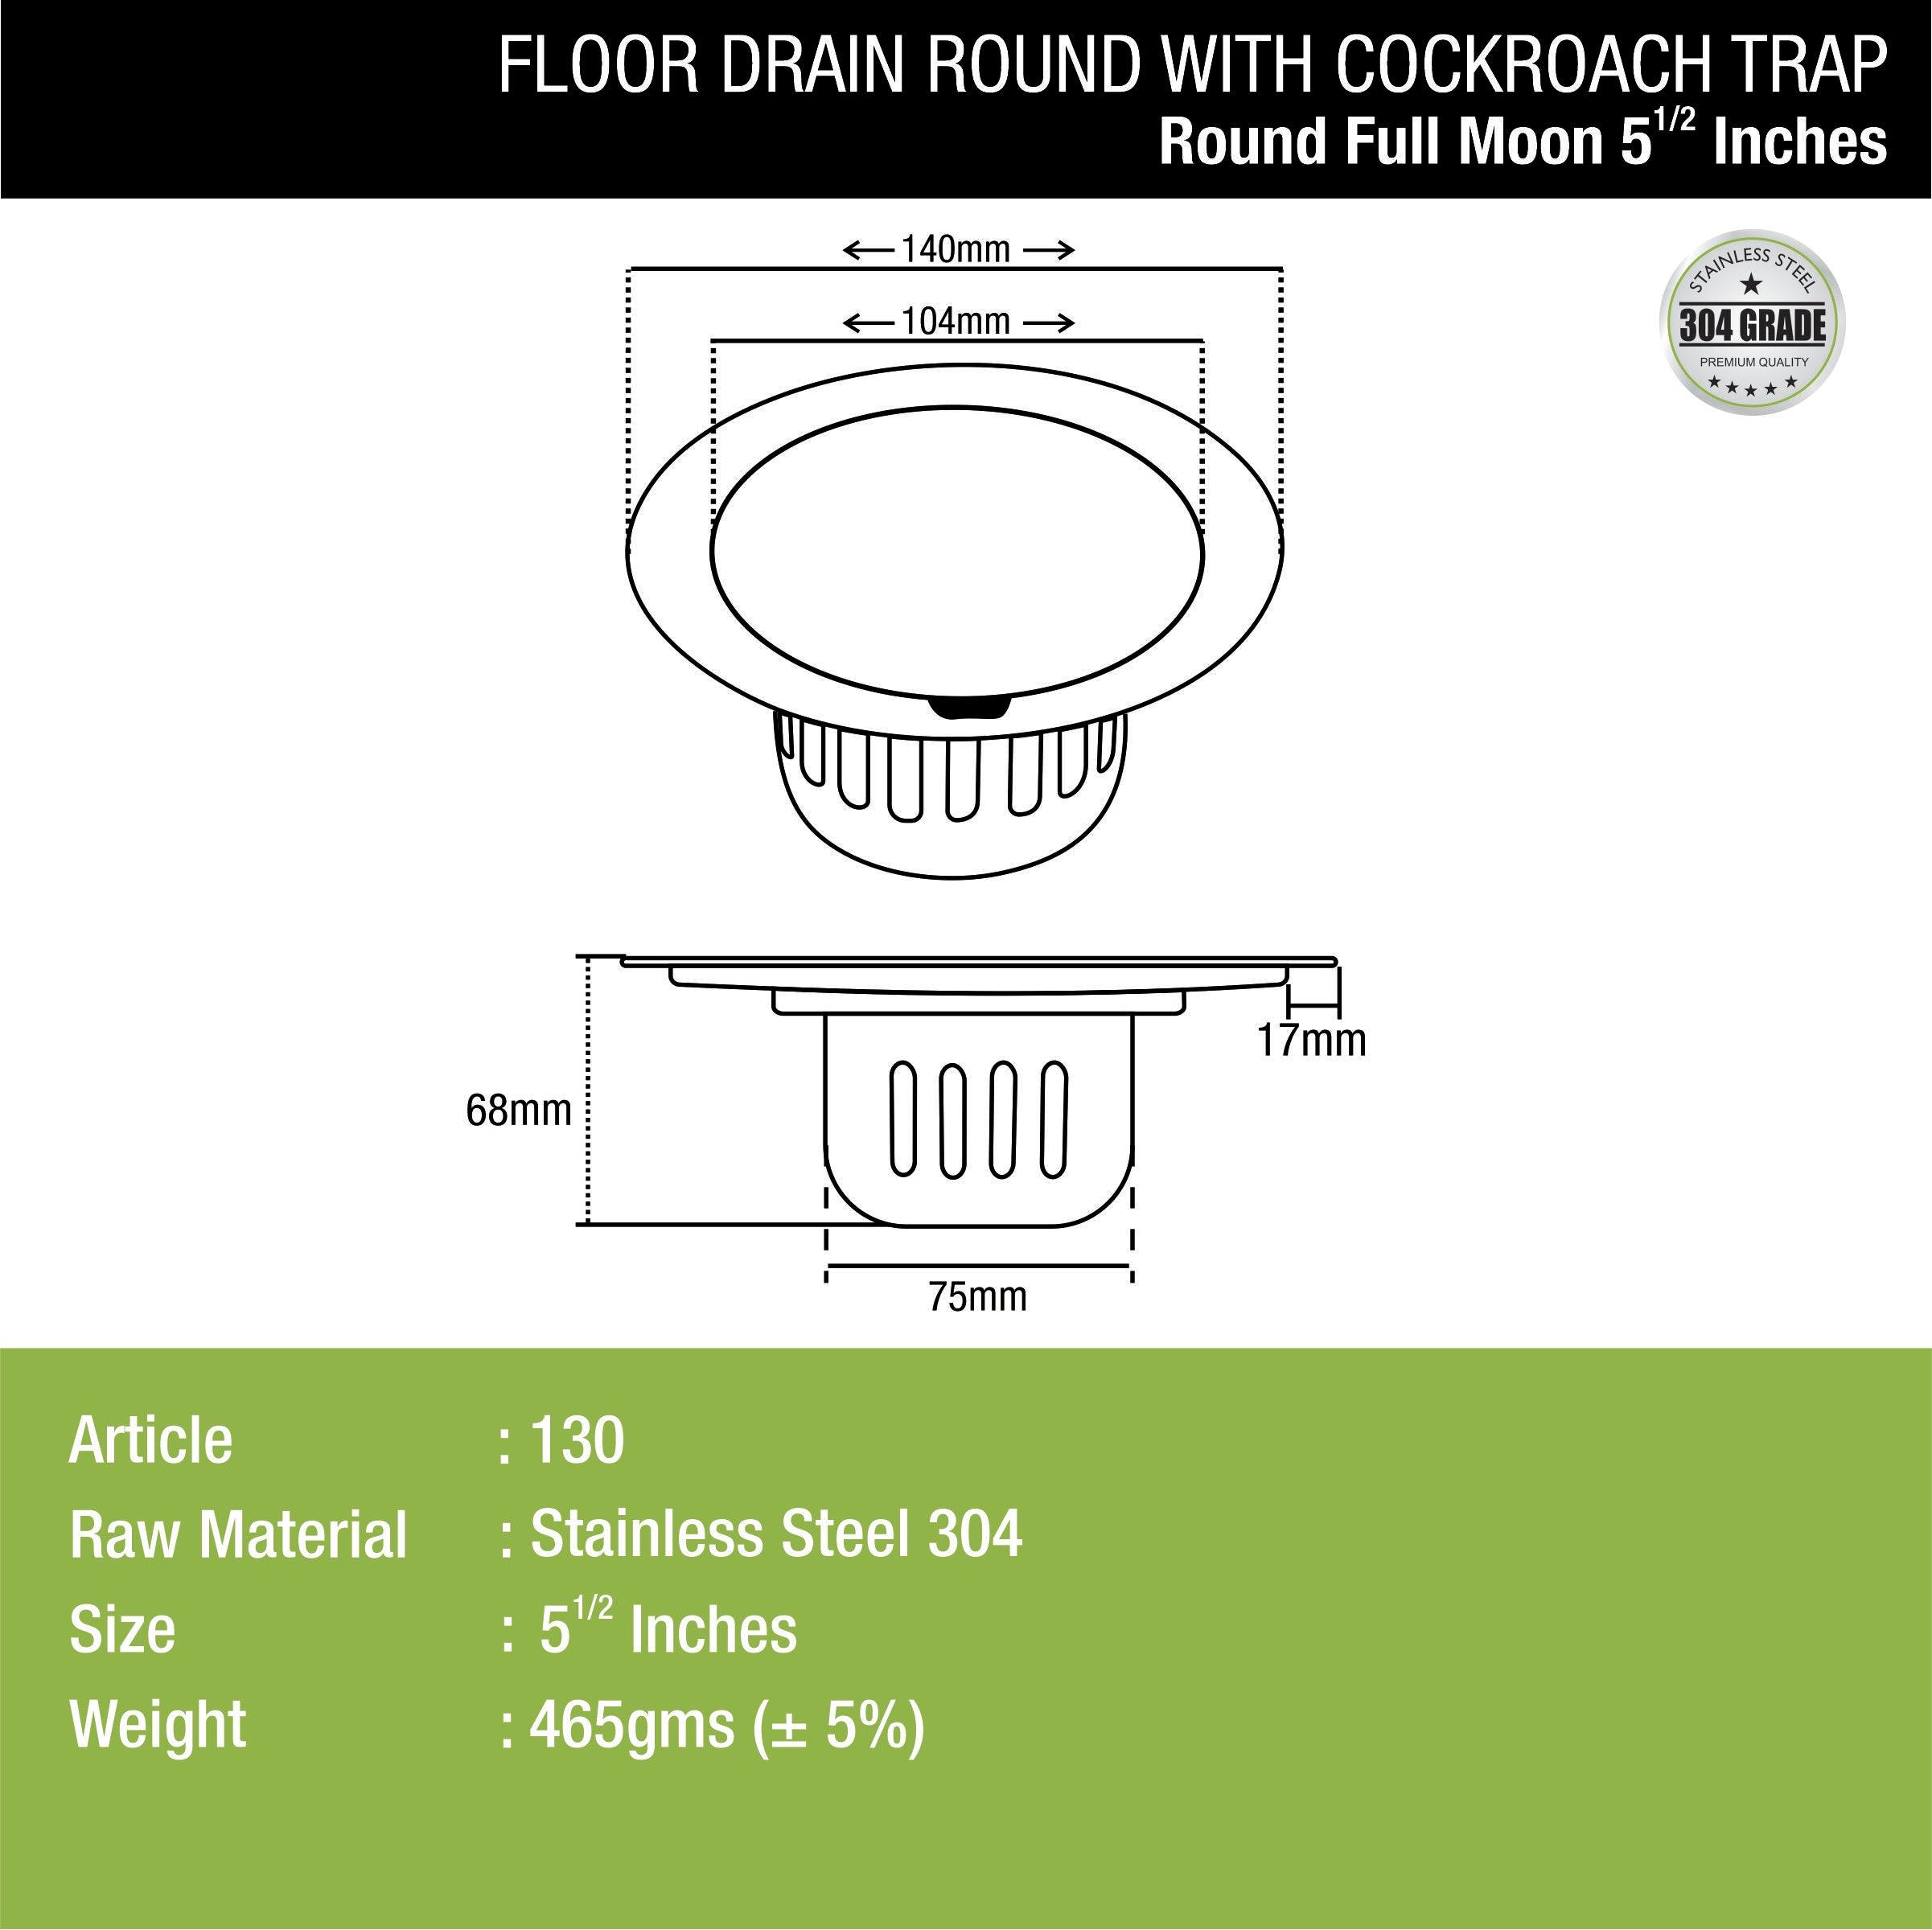 Full Moon Round Floor Drain (5.5 inches) with Cockroach Trap dimensions and sizes